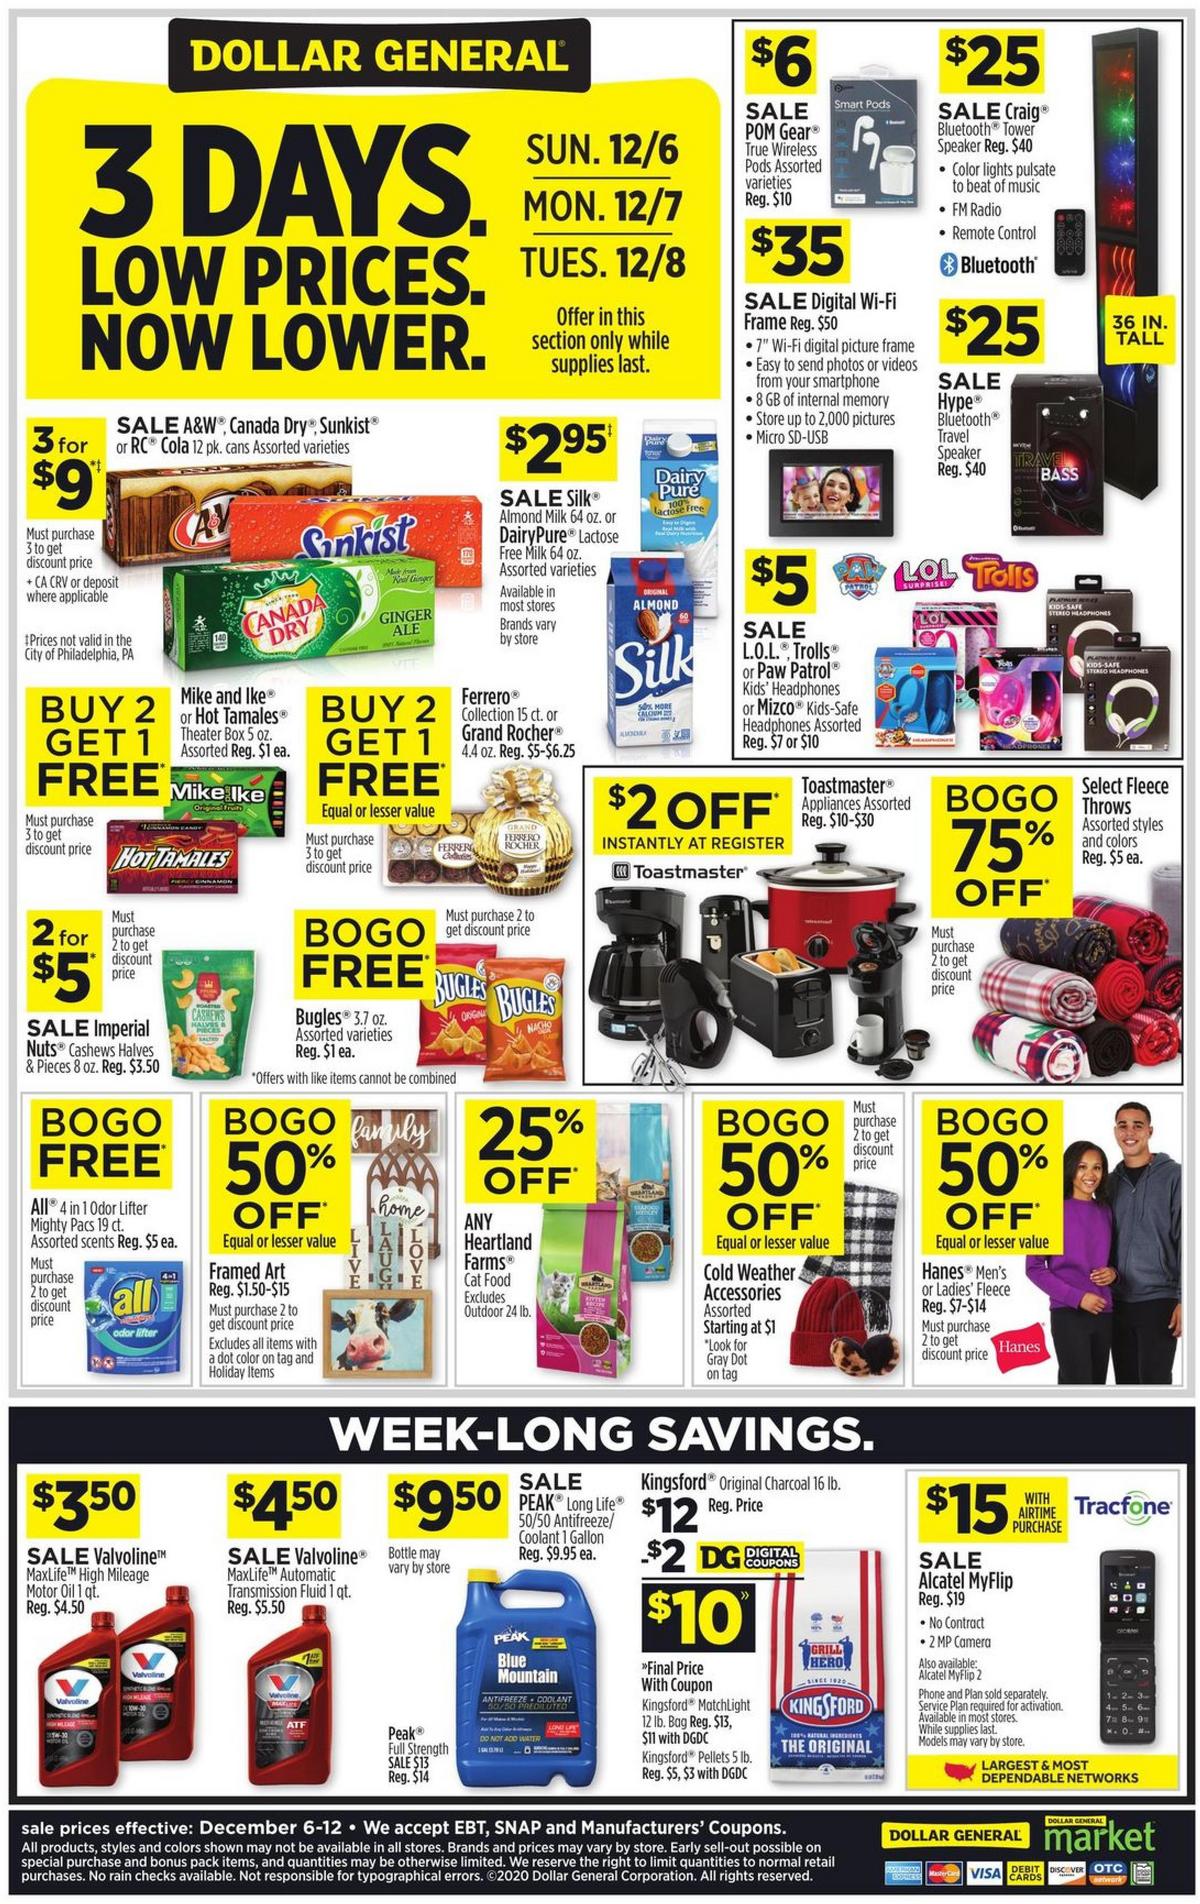 Dollar General Weekly Ads and Circulars from December 6 Page 2